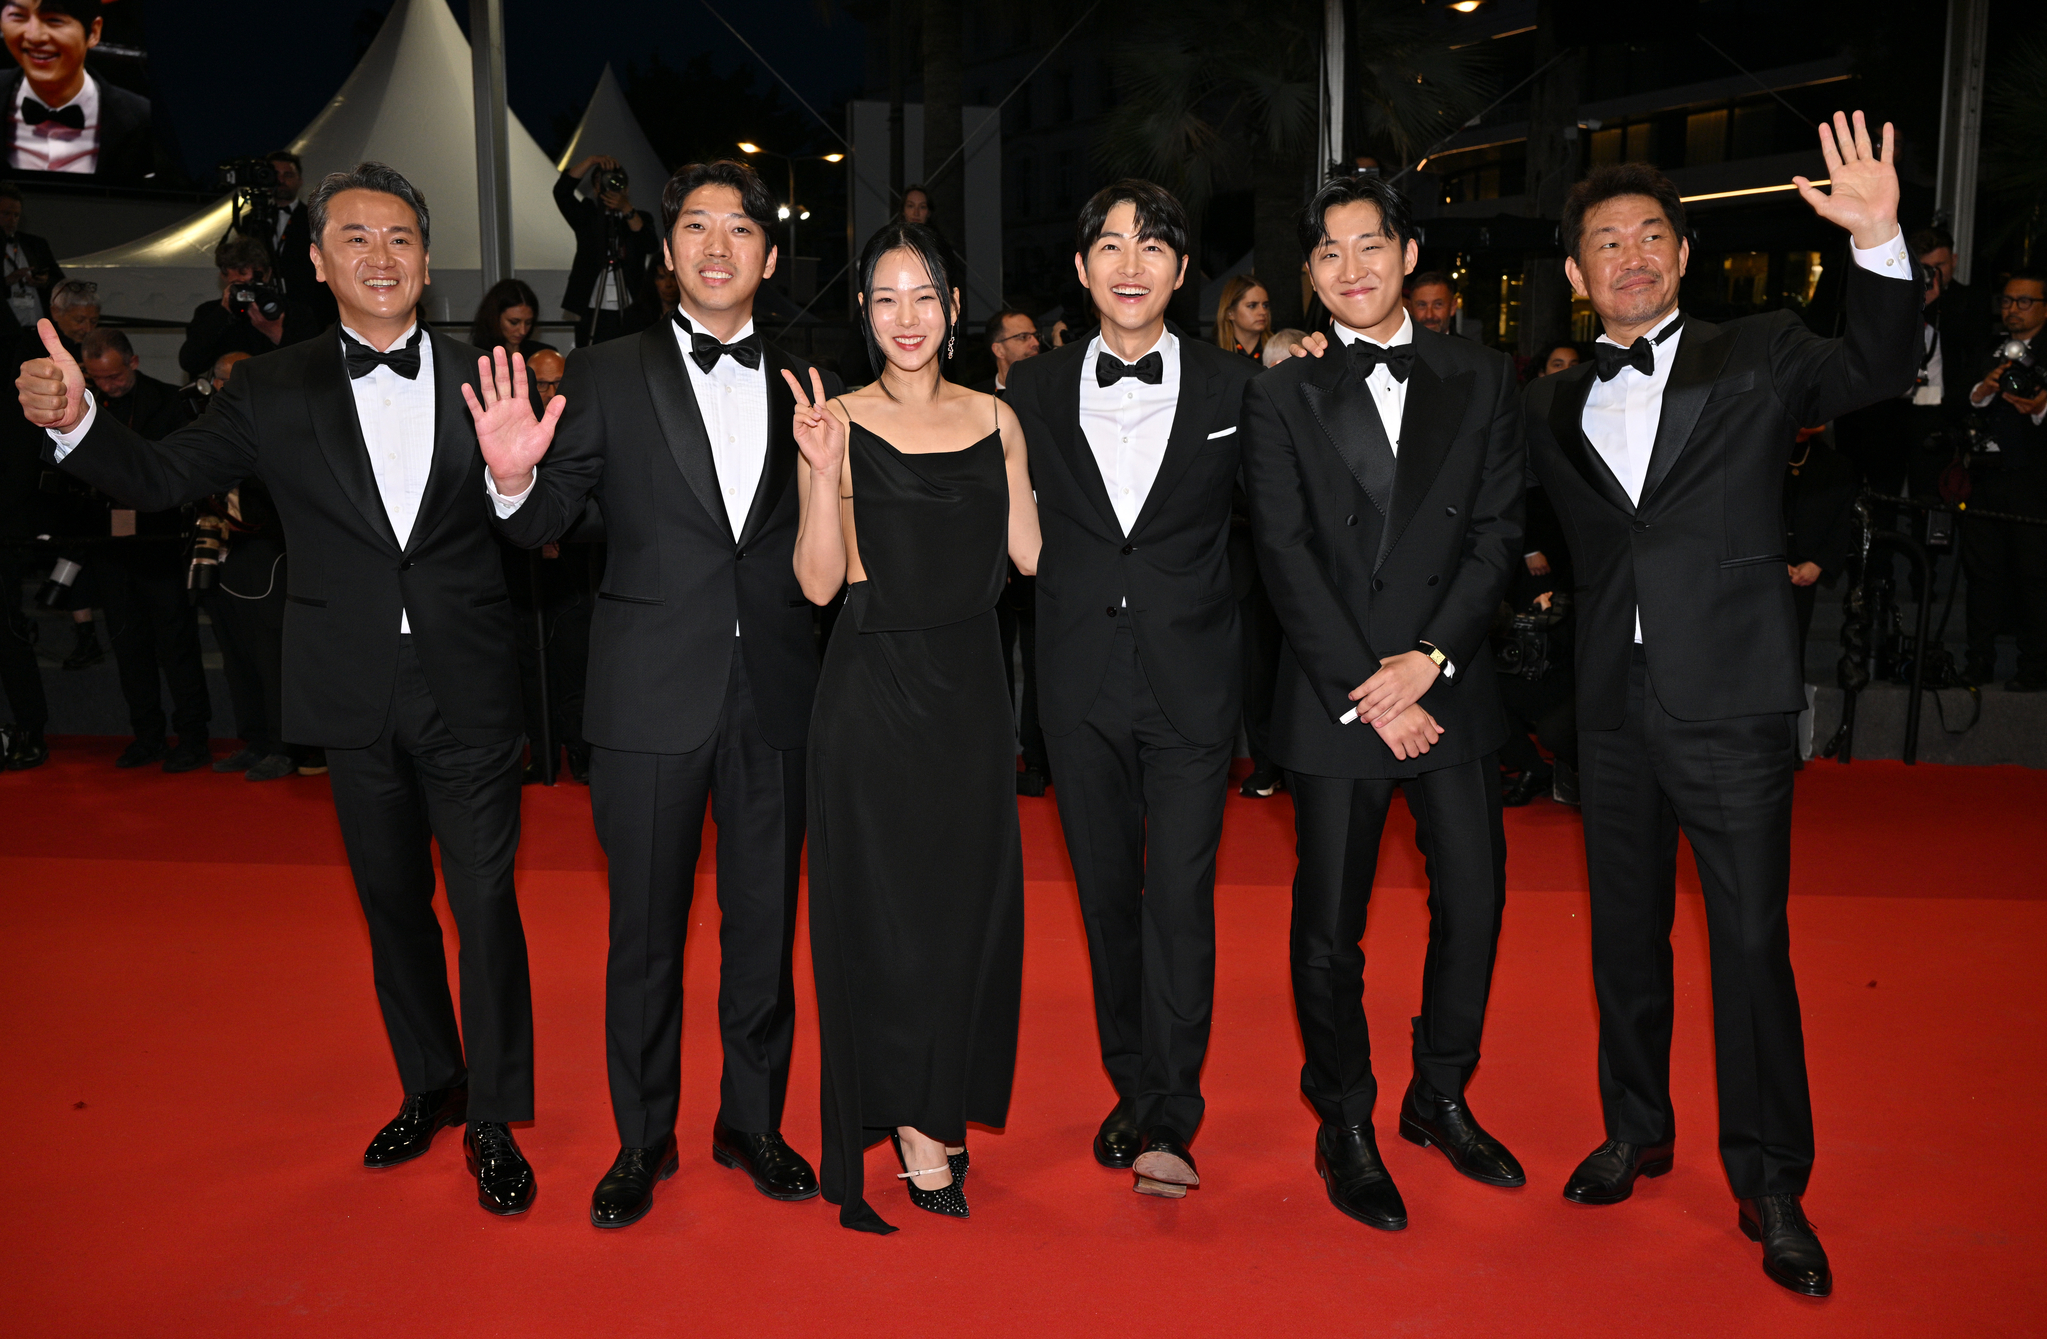 CANNES, FRANCE - MAY 24: Joong Ki Song, Kim Chang-Hoon, Hyoung Seo Kim and Xa Bin Hong attend the ″Il Sol Dell'Avvenire (A Brighter Tomorrow)″ red carpet during the 76th annual Cannes film festival at Palais des Festivals on May 24, 2023 in Cannes, France. (Photo by Lionel Hahn/Getty Images)